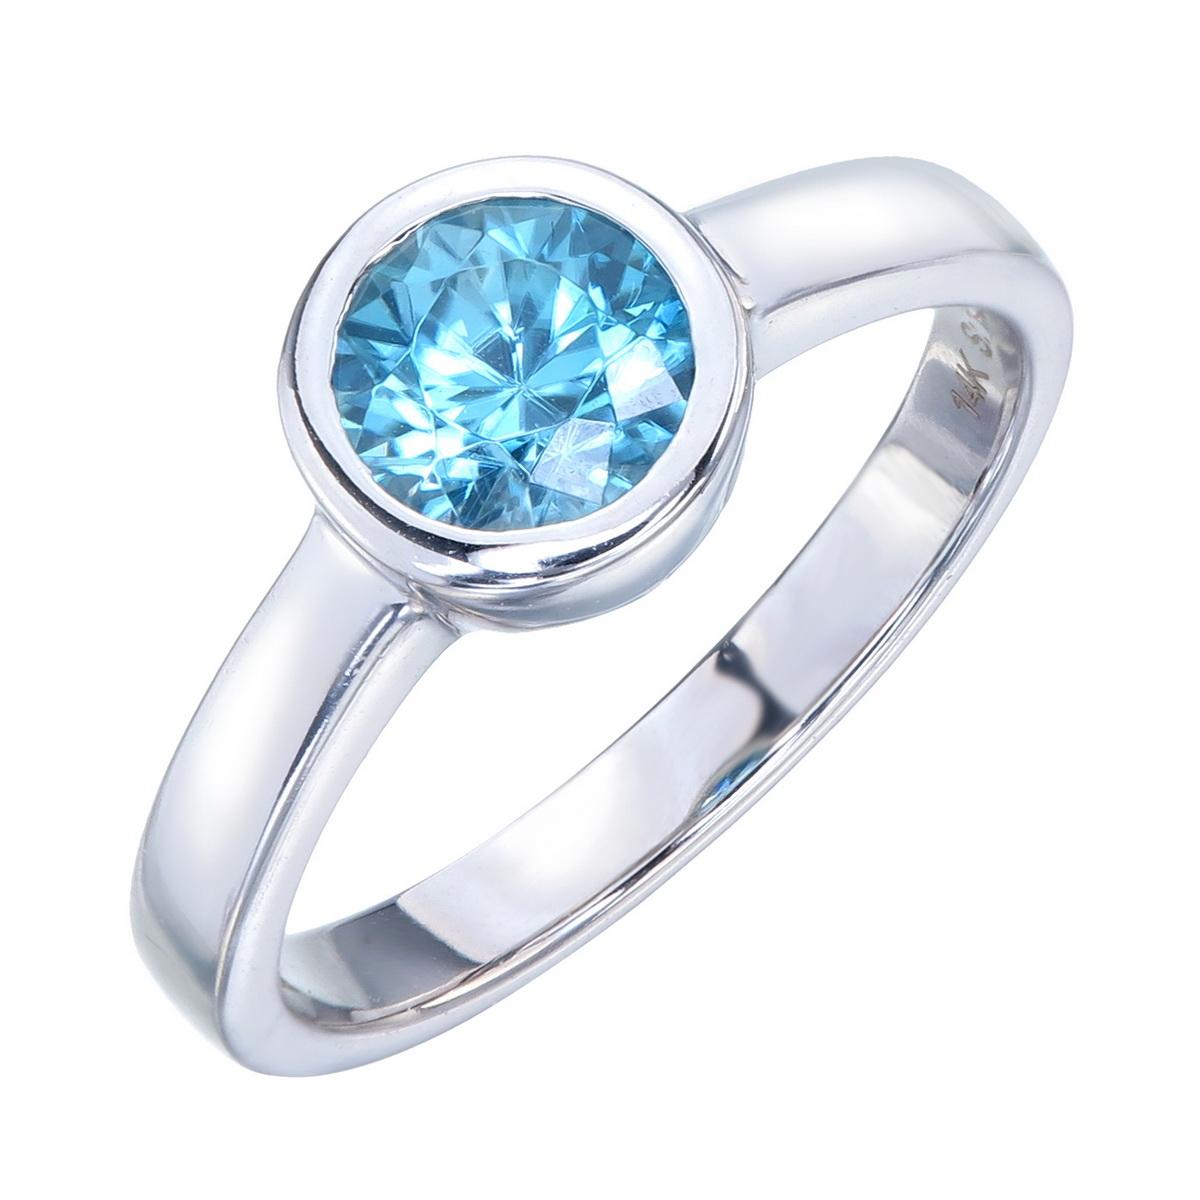 Orloff of Denmark; 14 Karat Solitaire Ring set with a sensational Natural Metallic Blue Zircon from Ratanakiri, Cambodia.
This particular Zircon has been recut from a crudely shaped oval into an excellent brilliant cut round ending up at 1.38